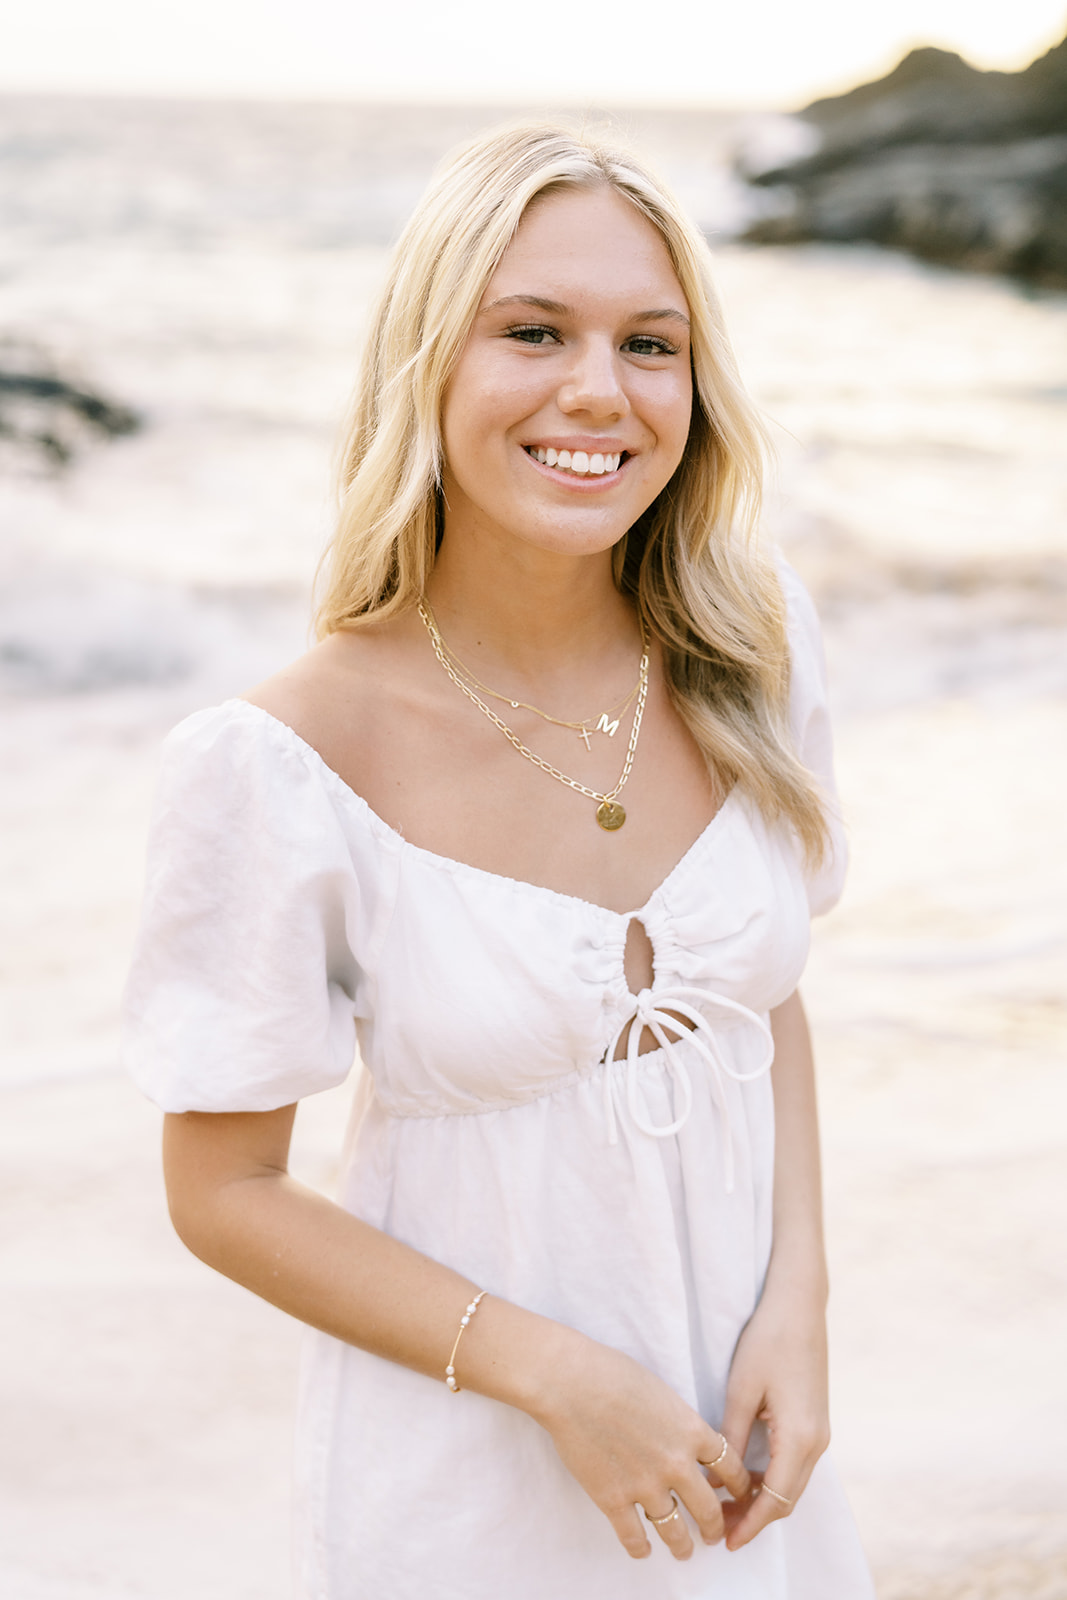 A smiling young woman in a white dress standing on Halona Cove beach in Oahu